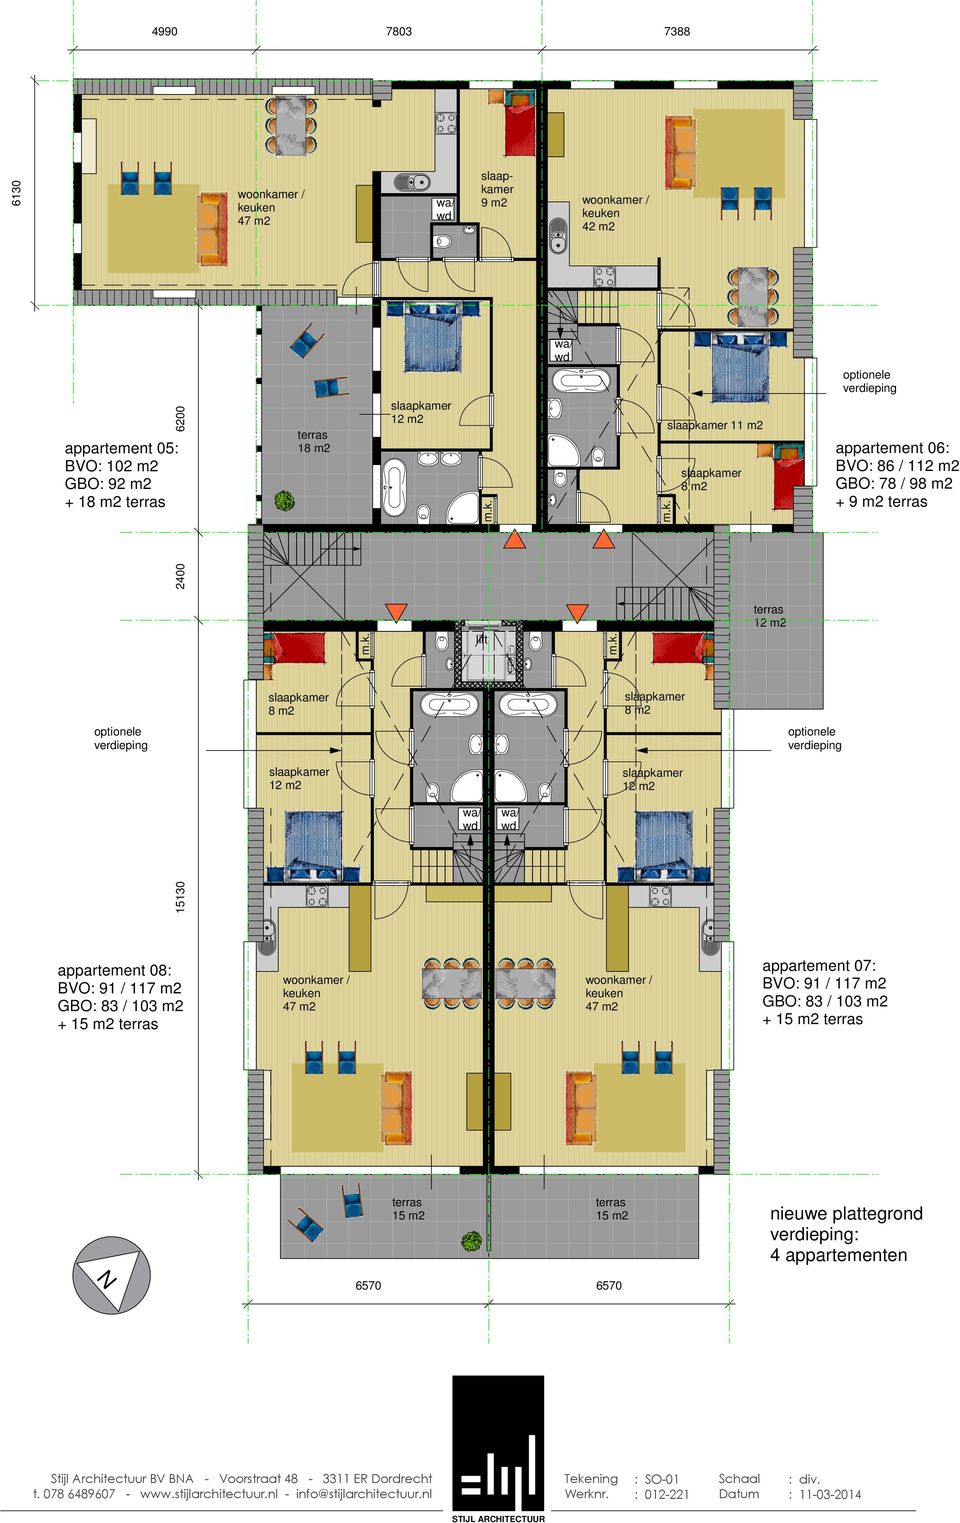 m2 15130 appartement 08: BVO: 91 / 117 m2 GBO: 83 / 103 m2 + 15 m2 terras woonkamer / keuken 47 m2 woonkamer / keuken 47 m2 appartement 07: BVO: 91 / 117 m2 GBO: 83 /